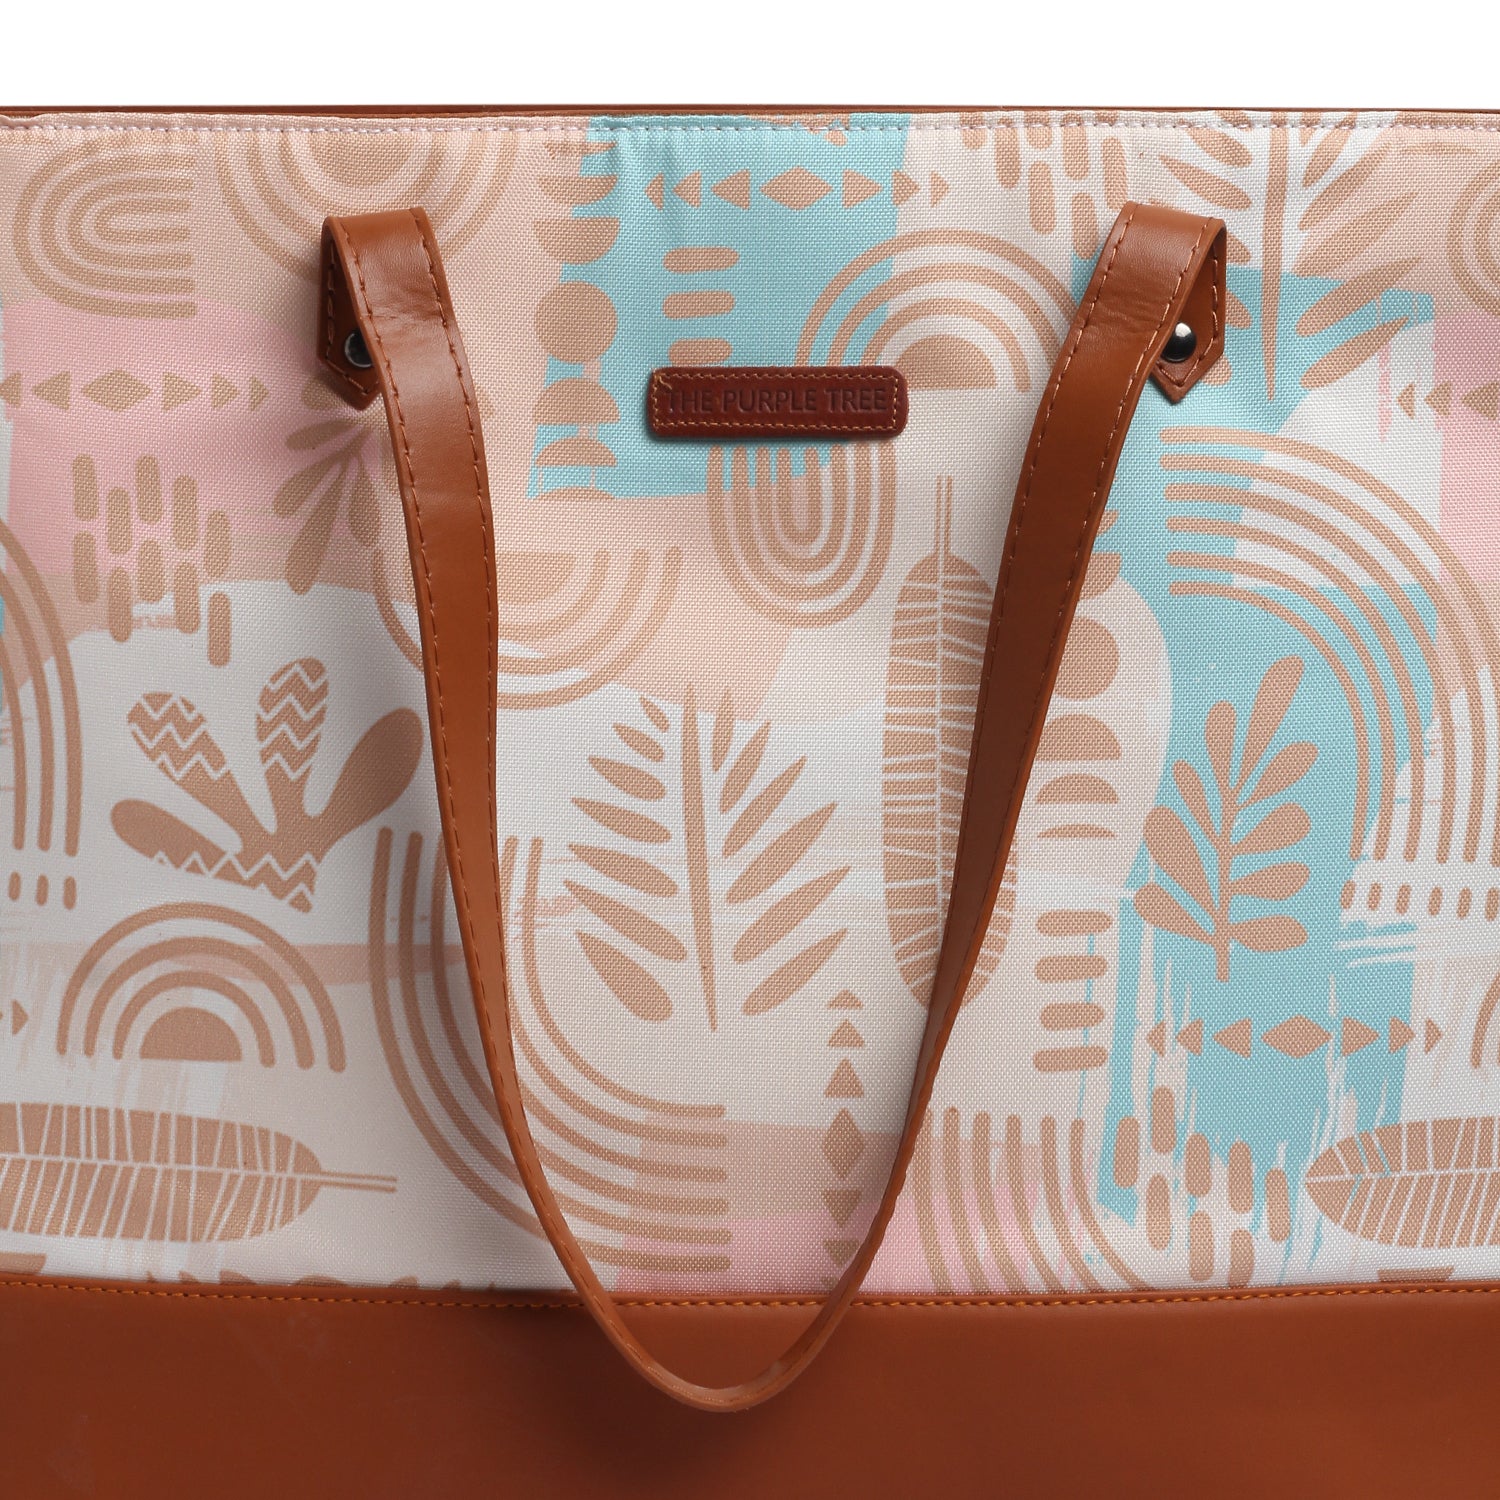 A stylish tote bag with a light blue and pink pattern, perfect for adding a pop of color to your outfit.